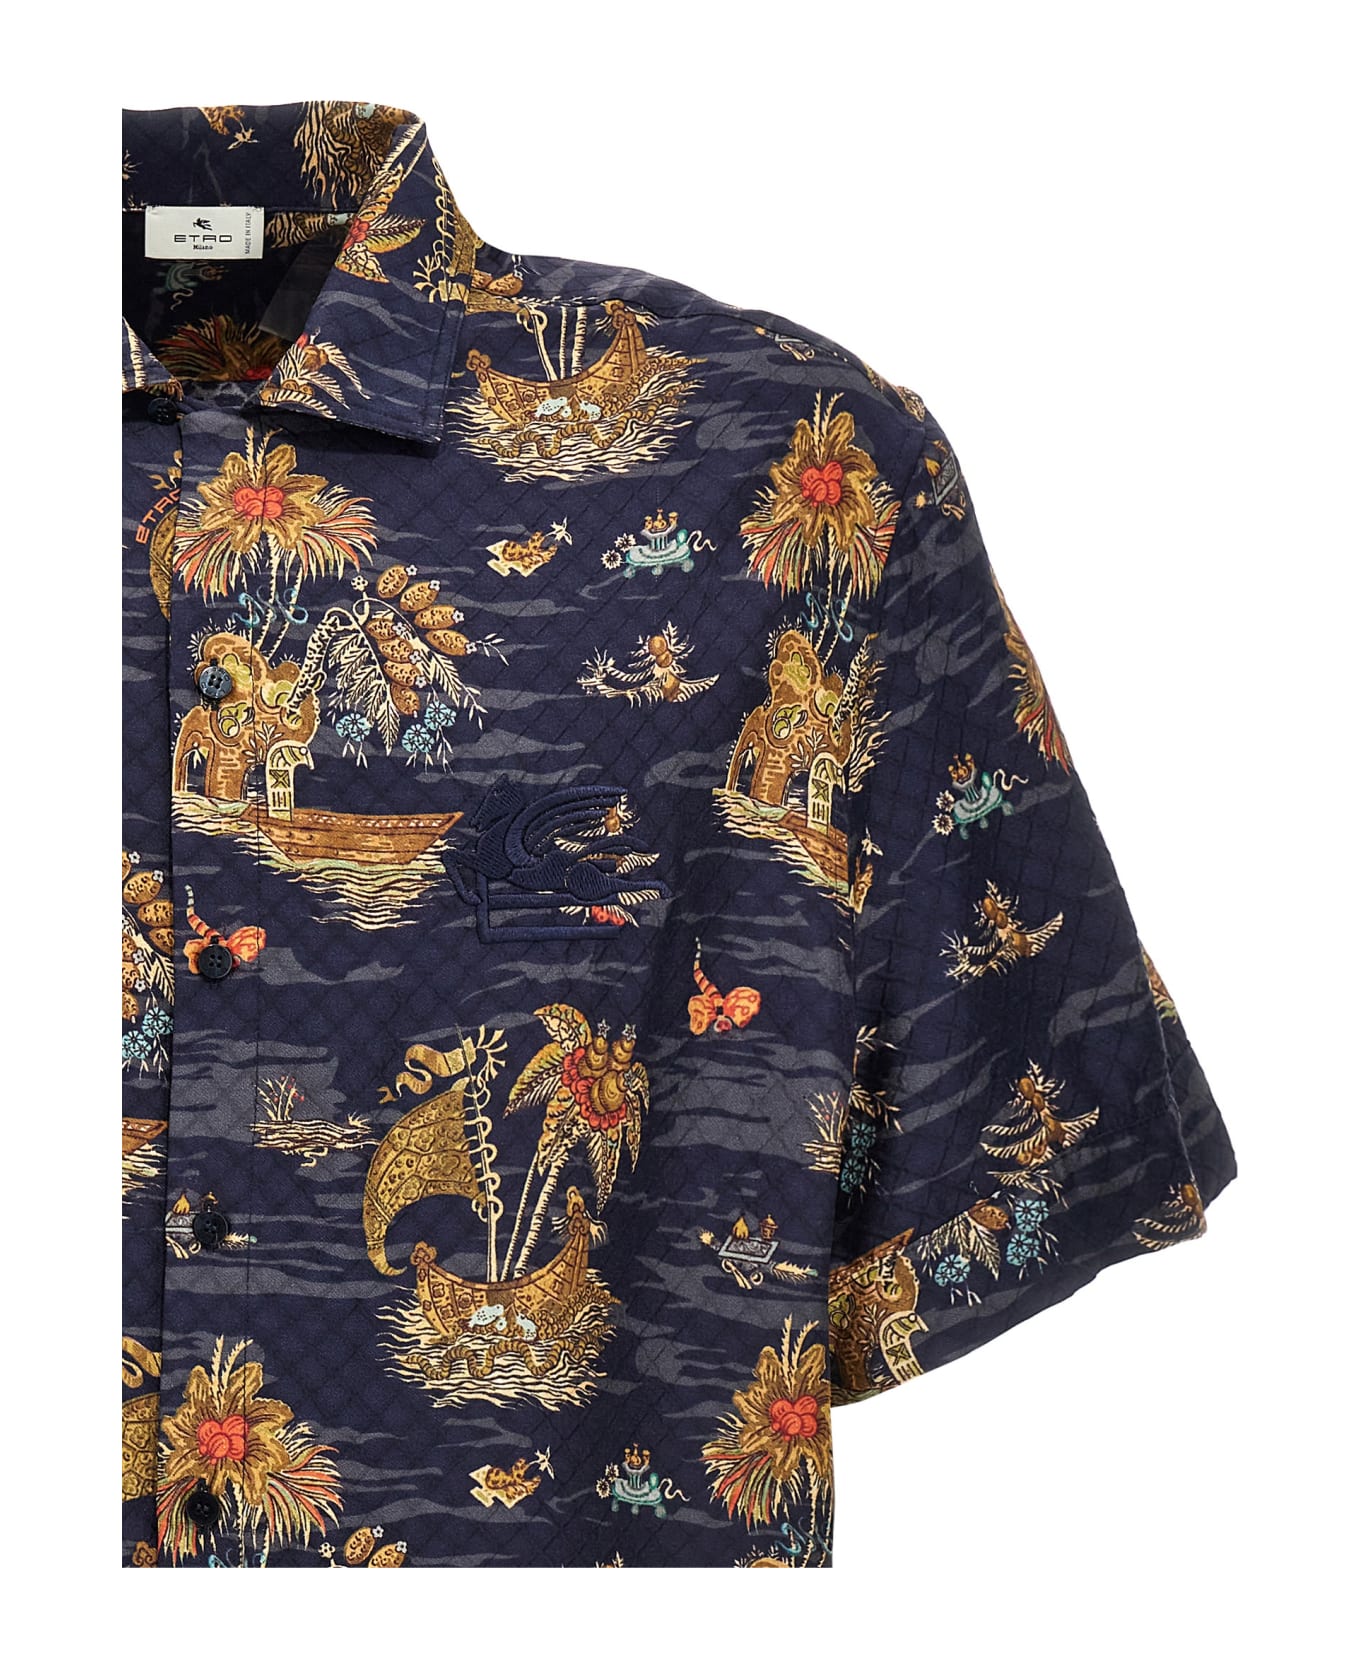 Etro Embroidered Logo Print Shirt - Multicolor